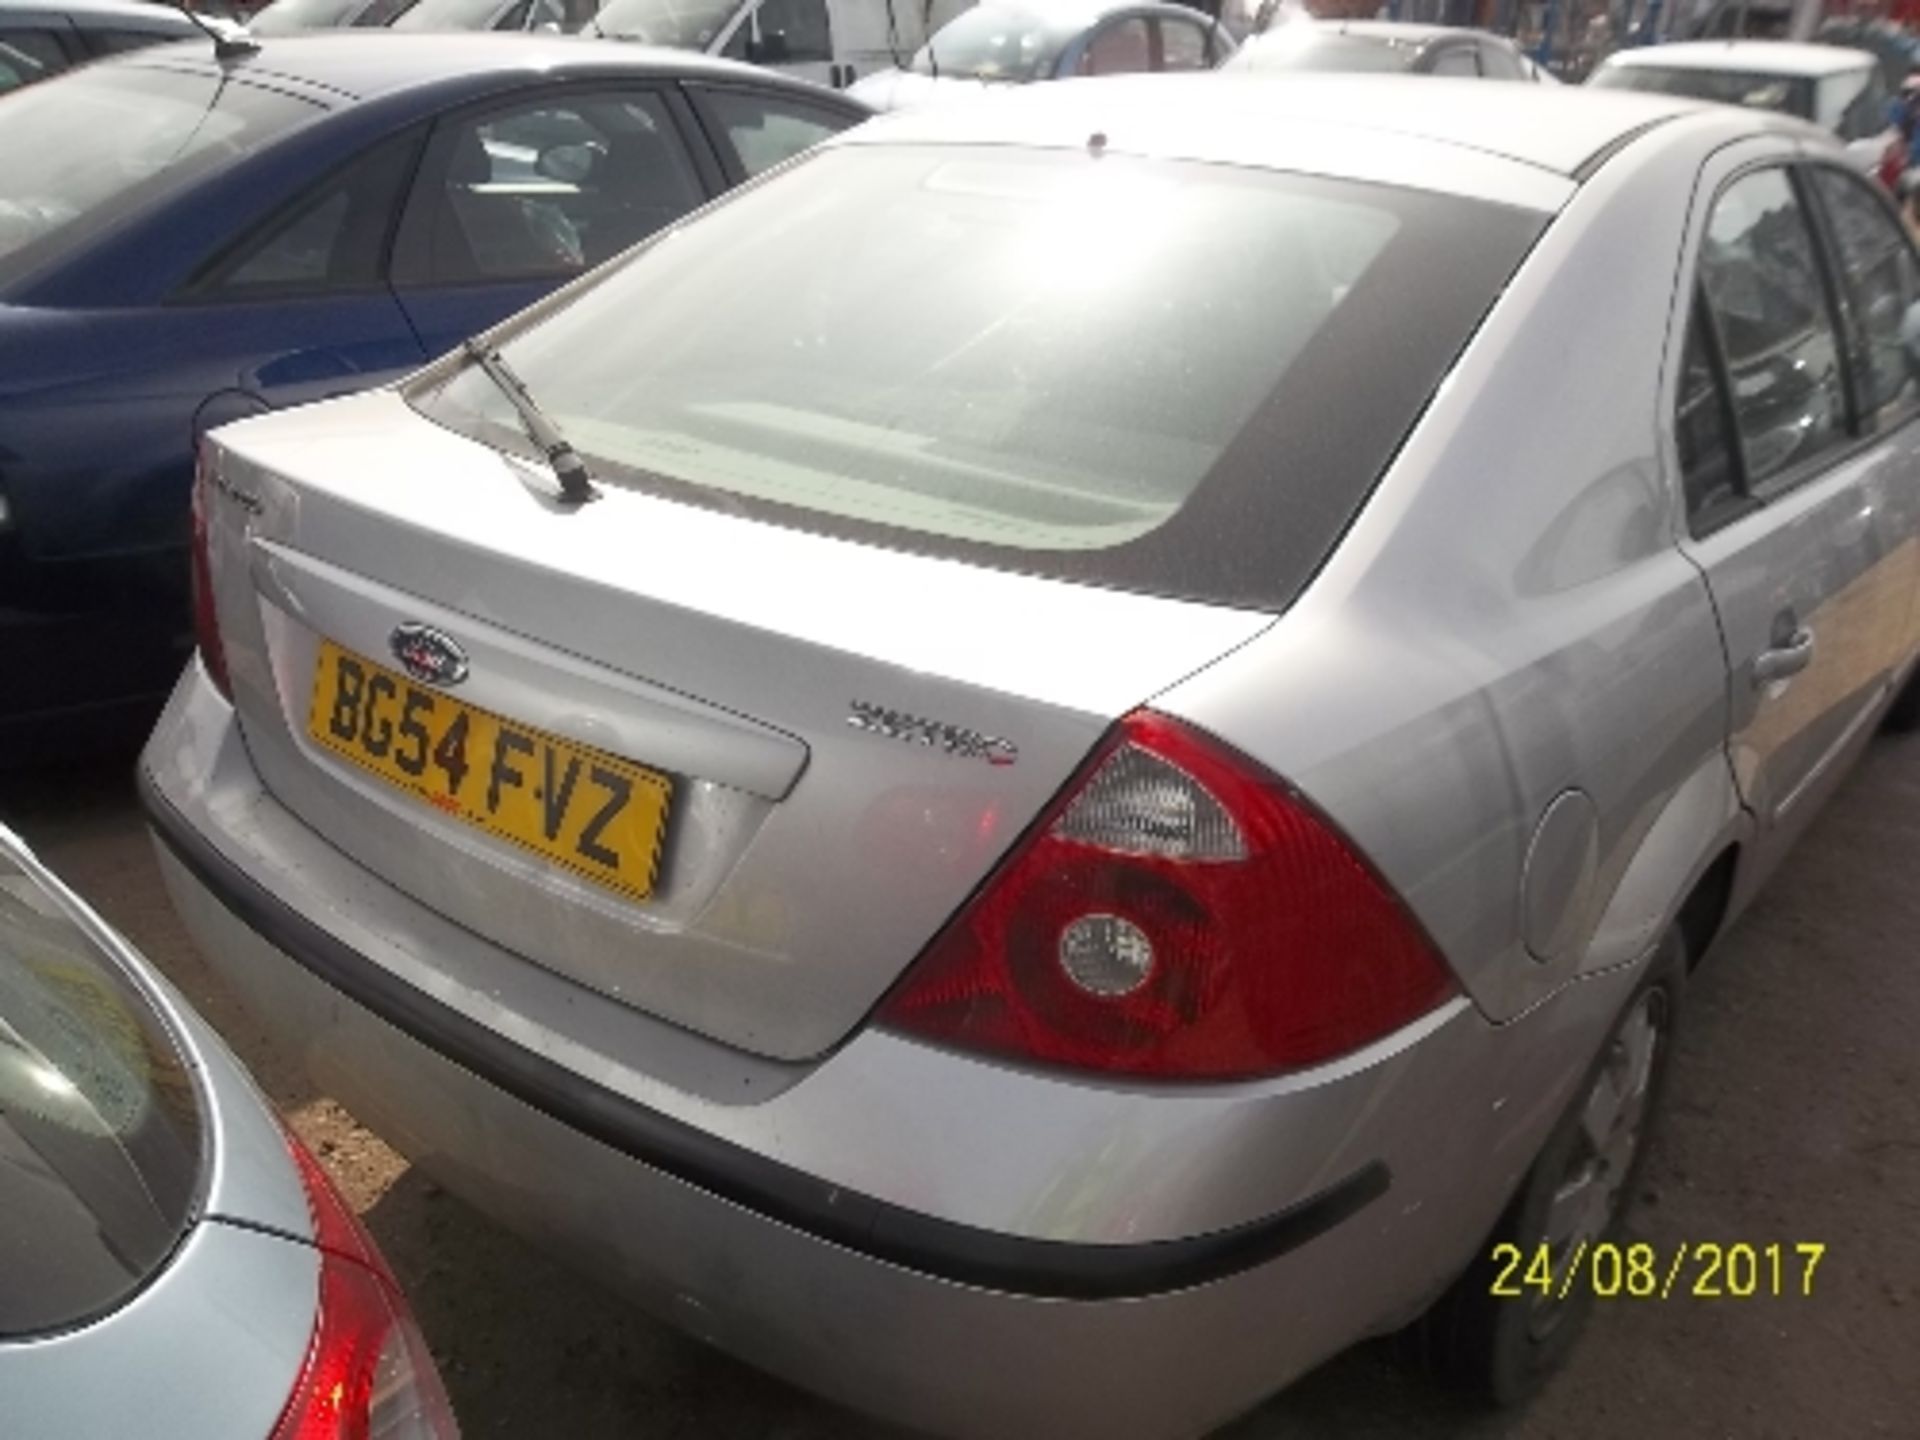 Ford Mondeo Zetec - BG54 FVZ Date of registration: 15.12.2004 1999cc, petrol, 4 speed auto, silver - Image 3 of 4